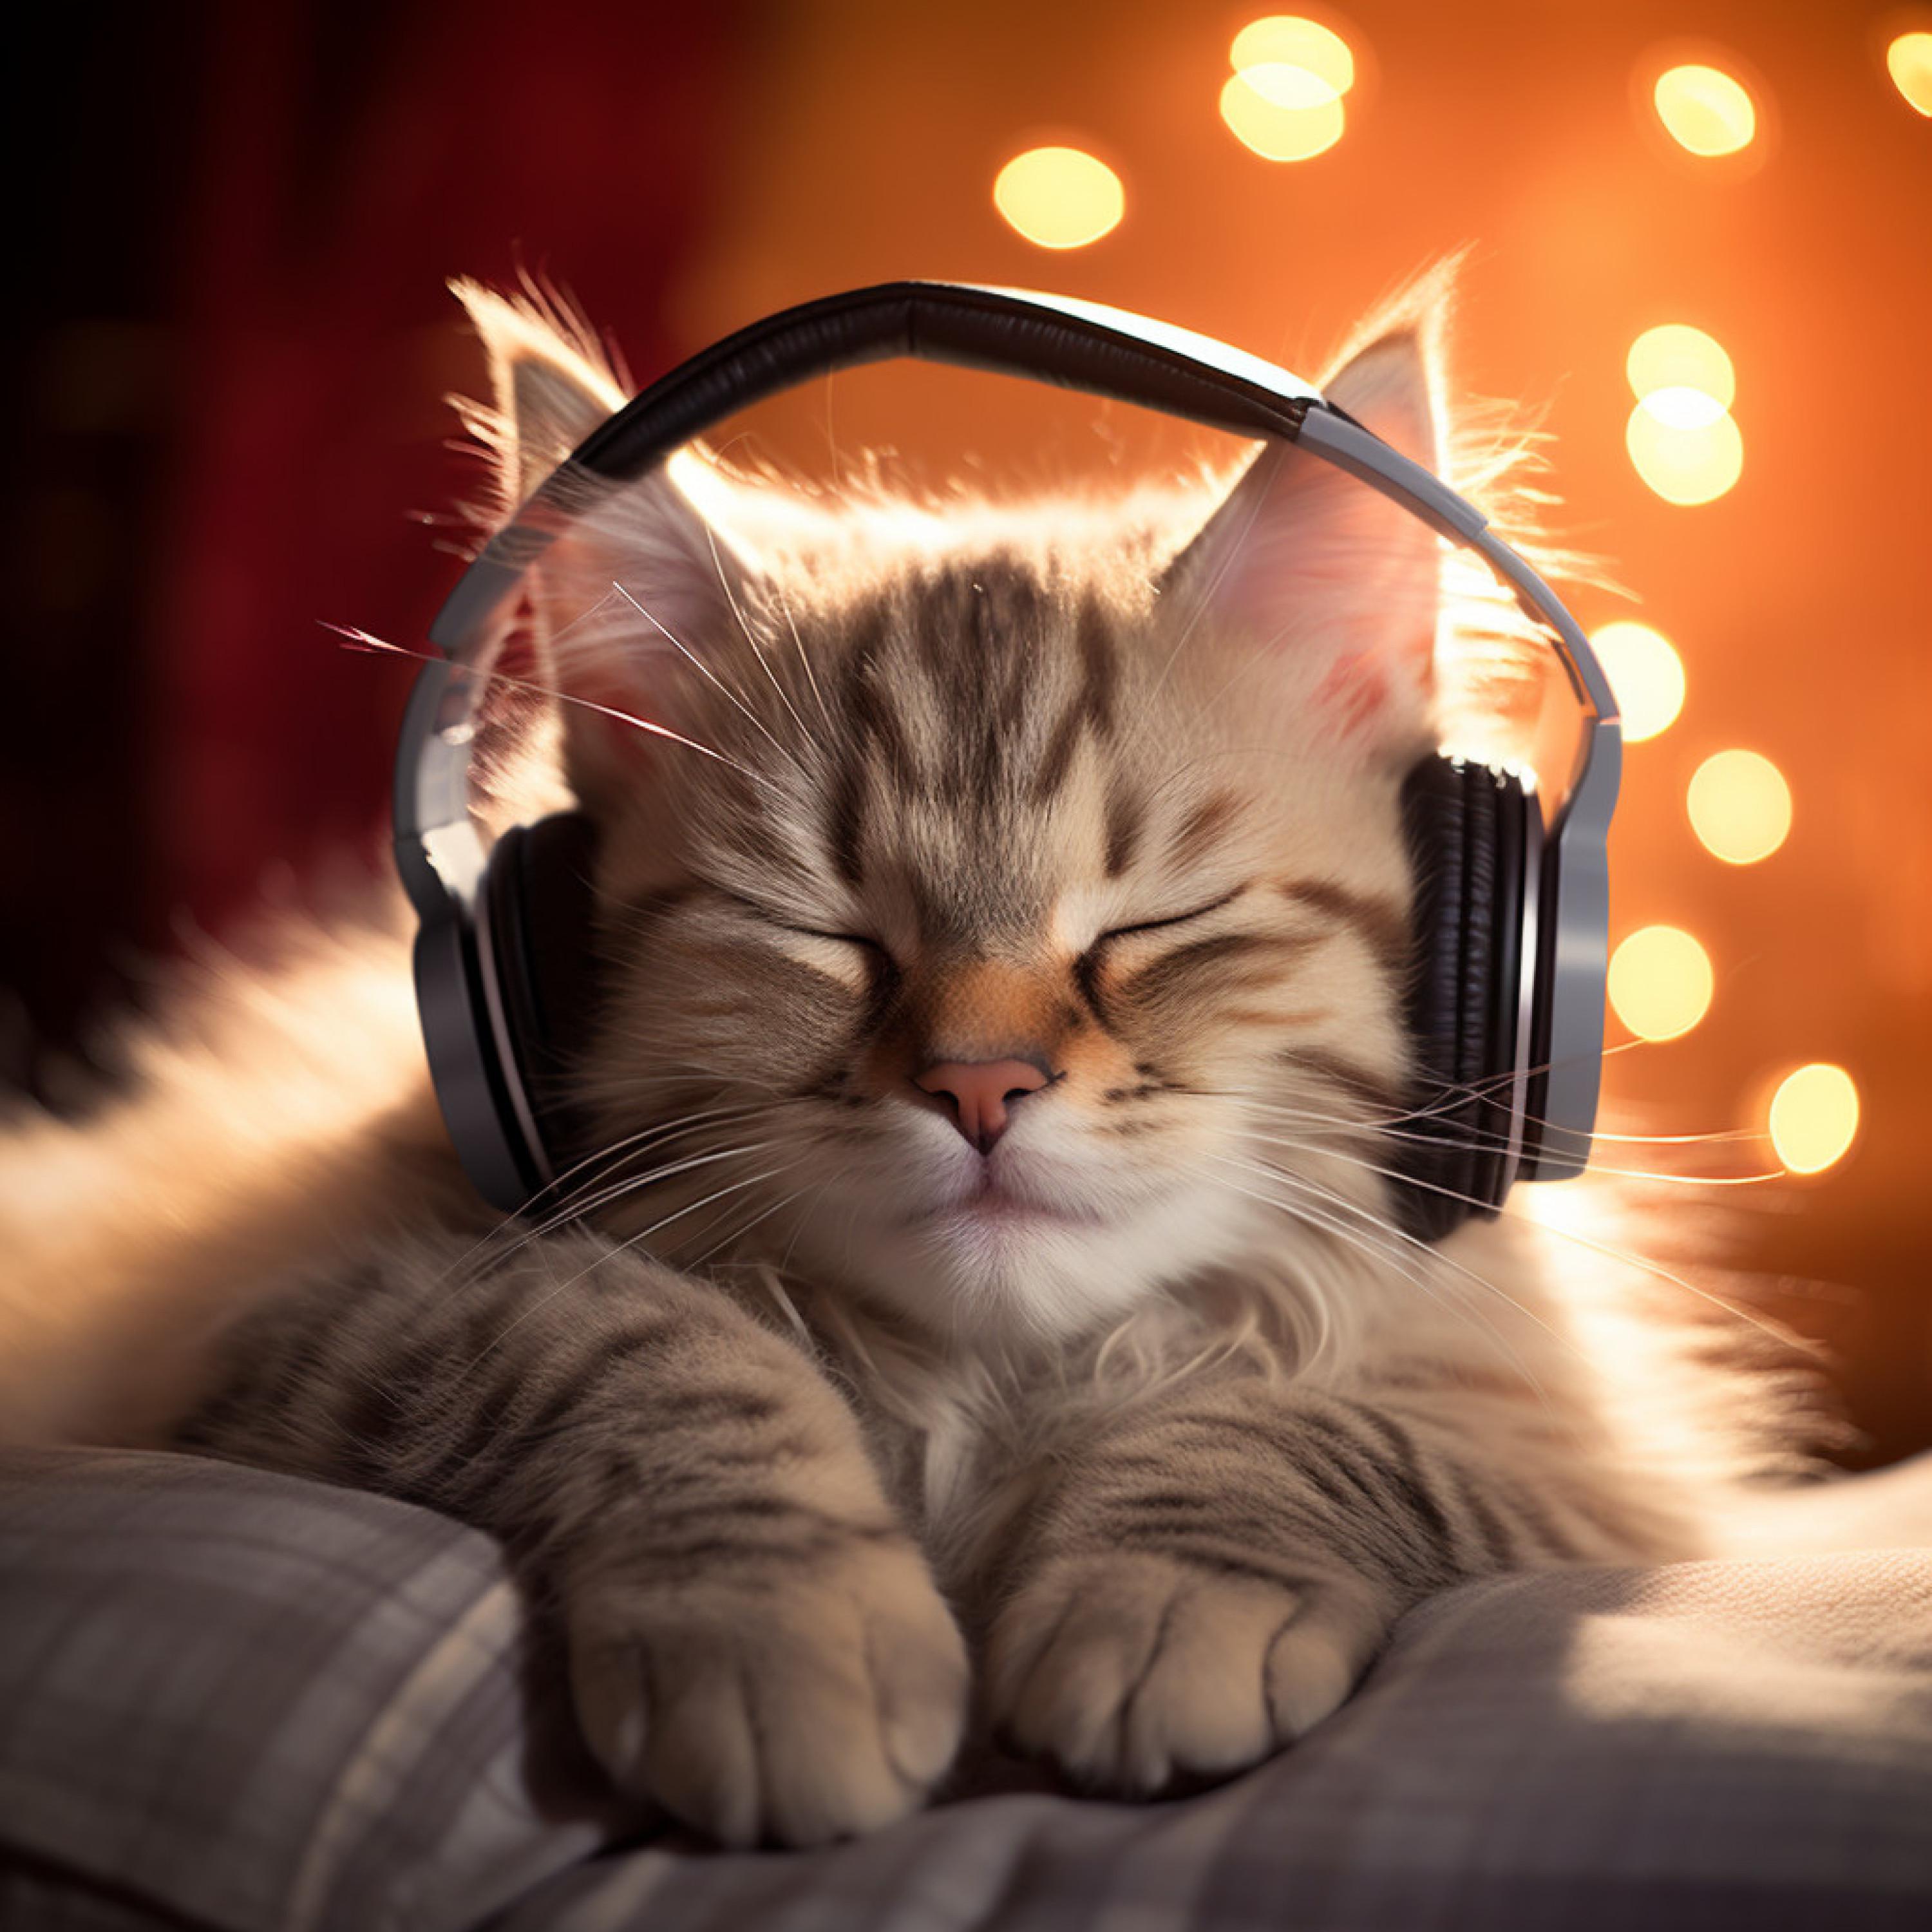 Jazz Music Therapy for Cats - Calm Binaural Tones